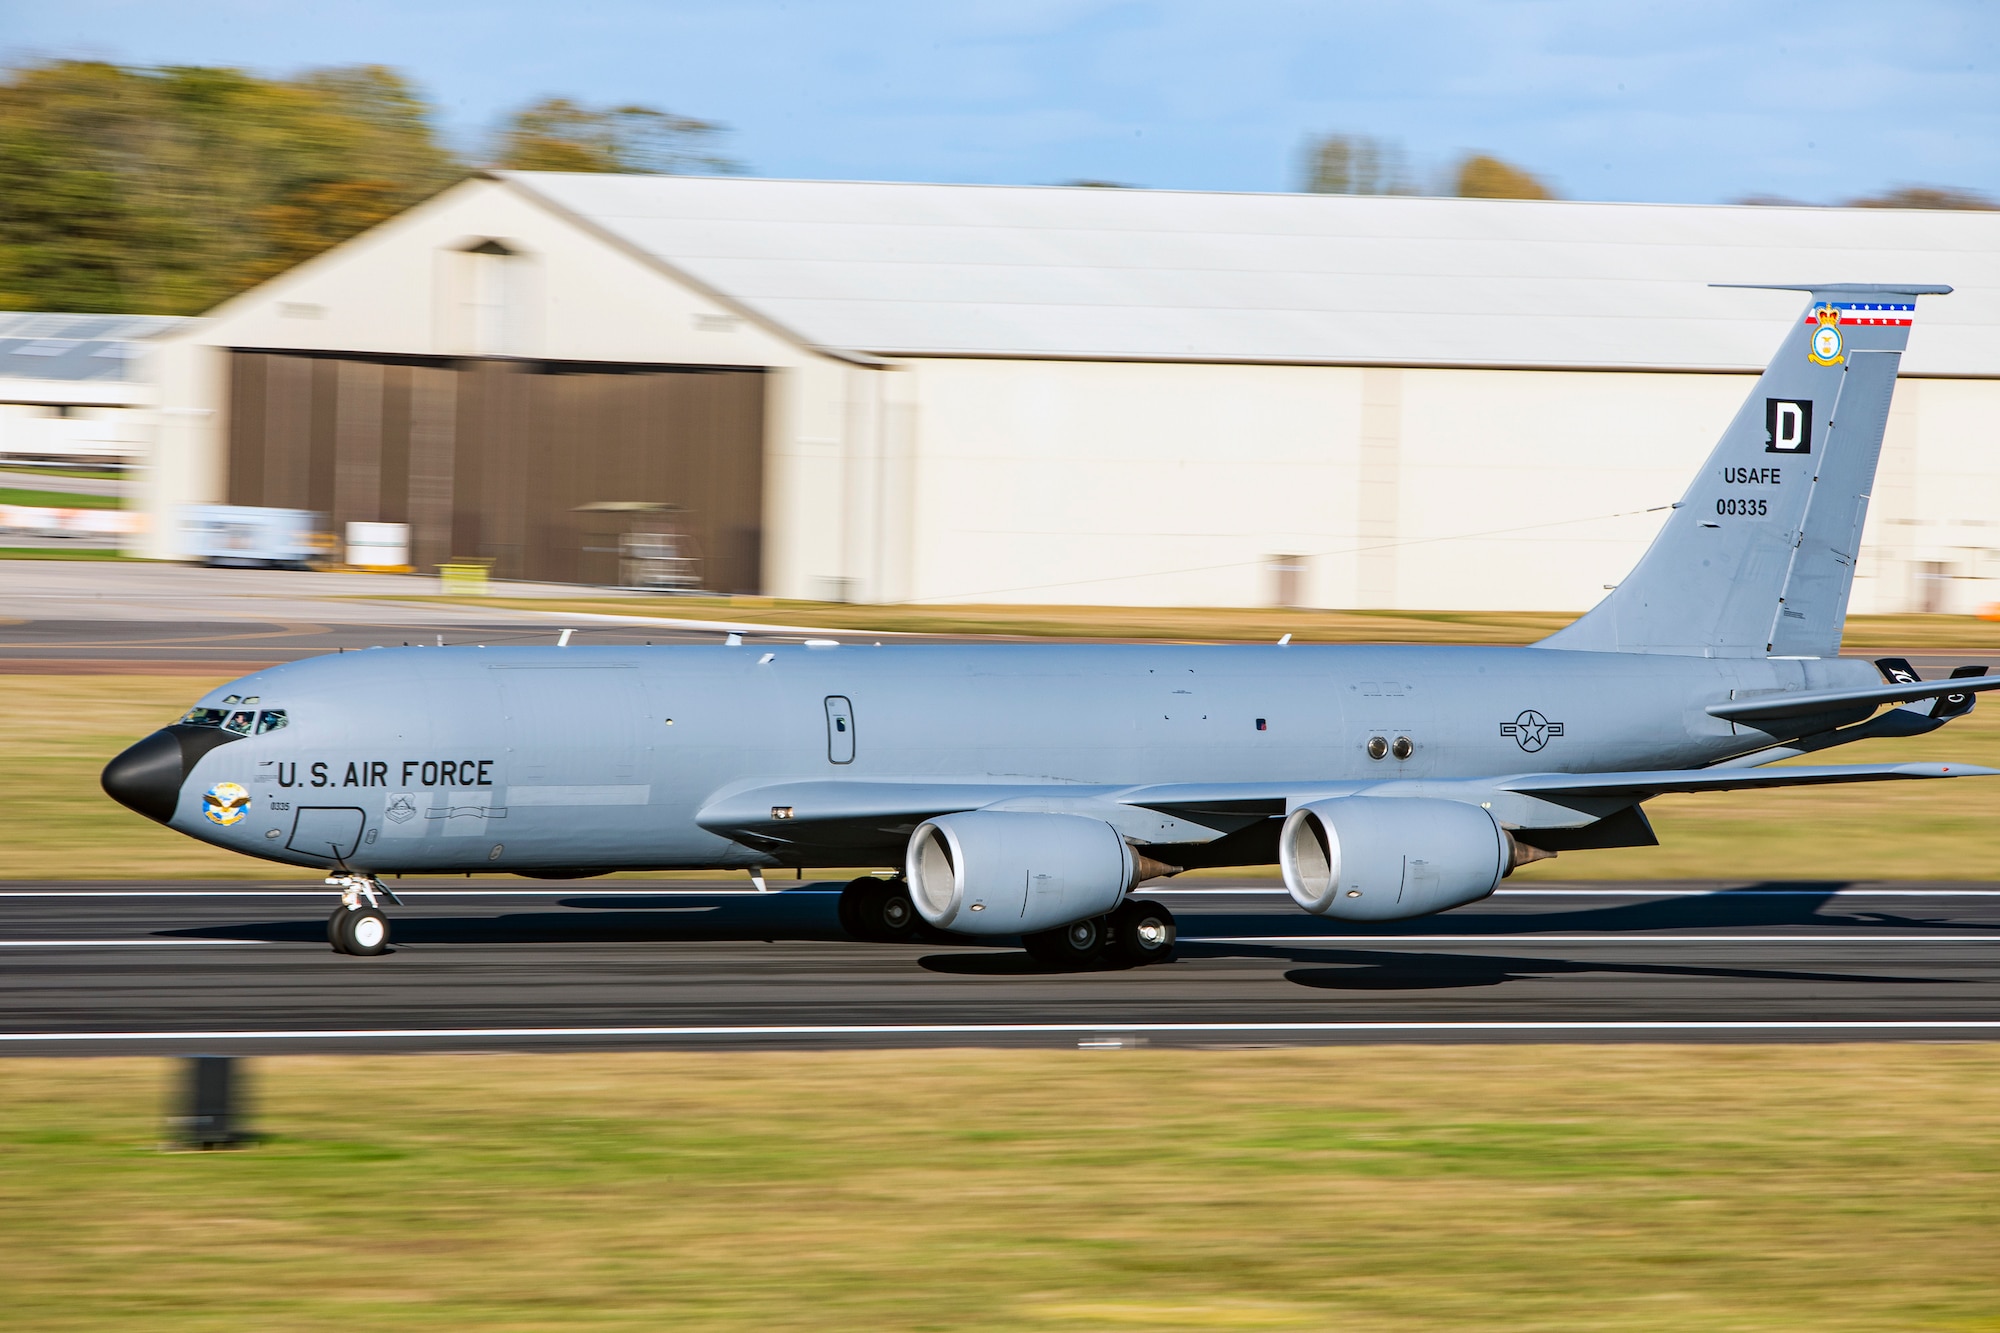 A KC-135 Stratotanker assigned to the 100th Air Refueling Wing lands on the flightline at RAF Fairford, England, Nov. 1, 2021. Airmen from the 100th ARW conducted operations out of RAFF as part of an Agile Combat Employment exercise. Utilizing ACE concepts ensures that U.S. forces in Europe are better equipped to operate from locations with varying levels of capacity and support to accomplish the mission. This further ensures Airmen and aircrews are postured to deliver lethal combat power across the full spectrum of military operations. (U.S. Air Force photo by Senior Airman Eugene Oliver)